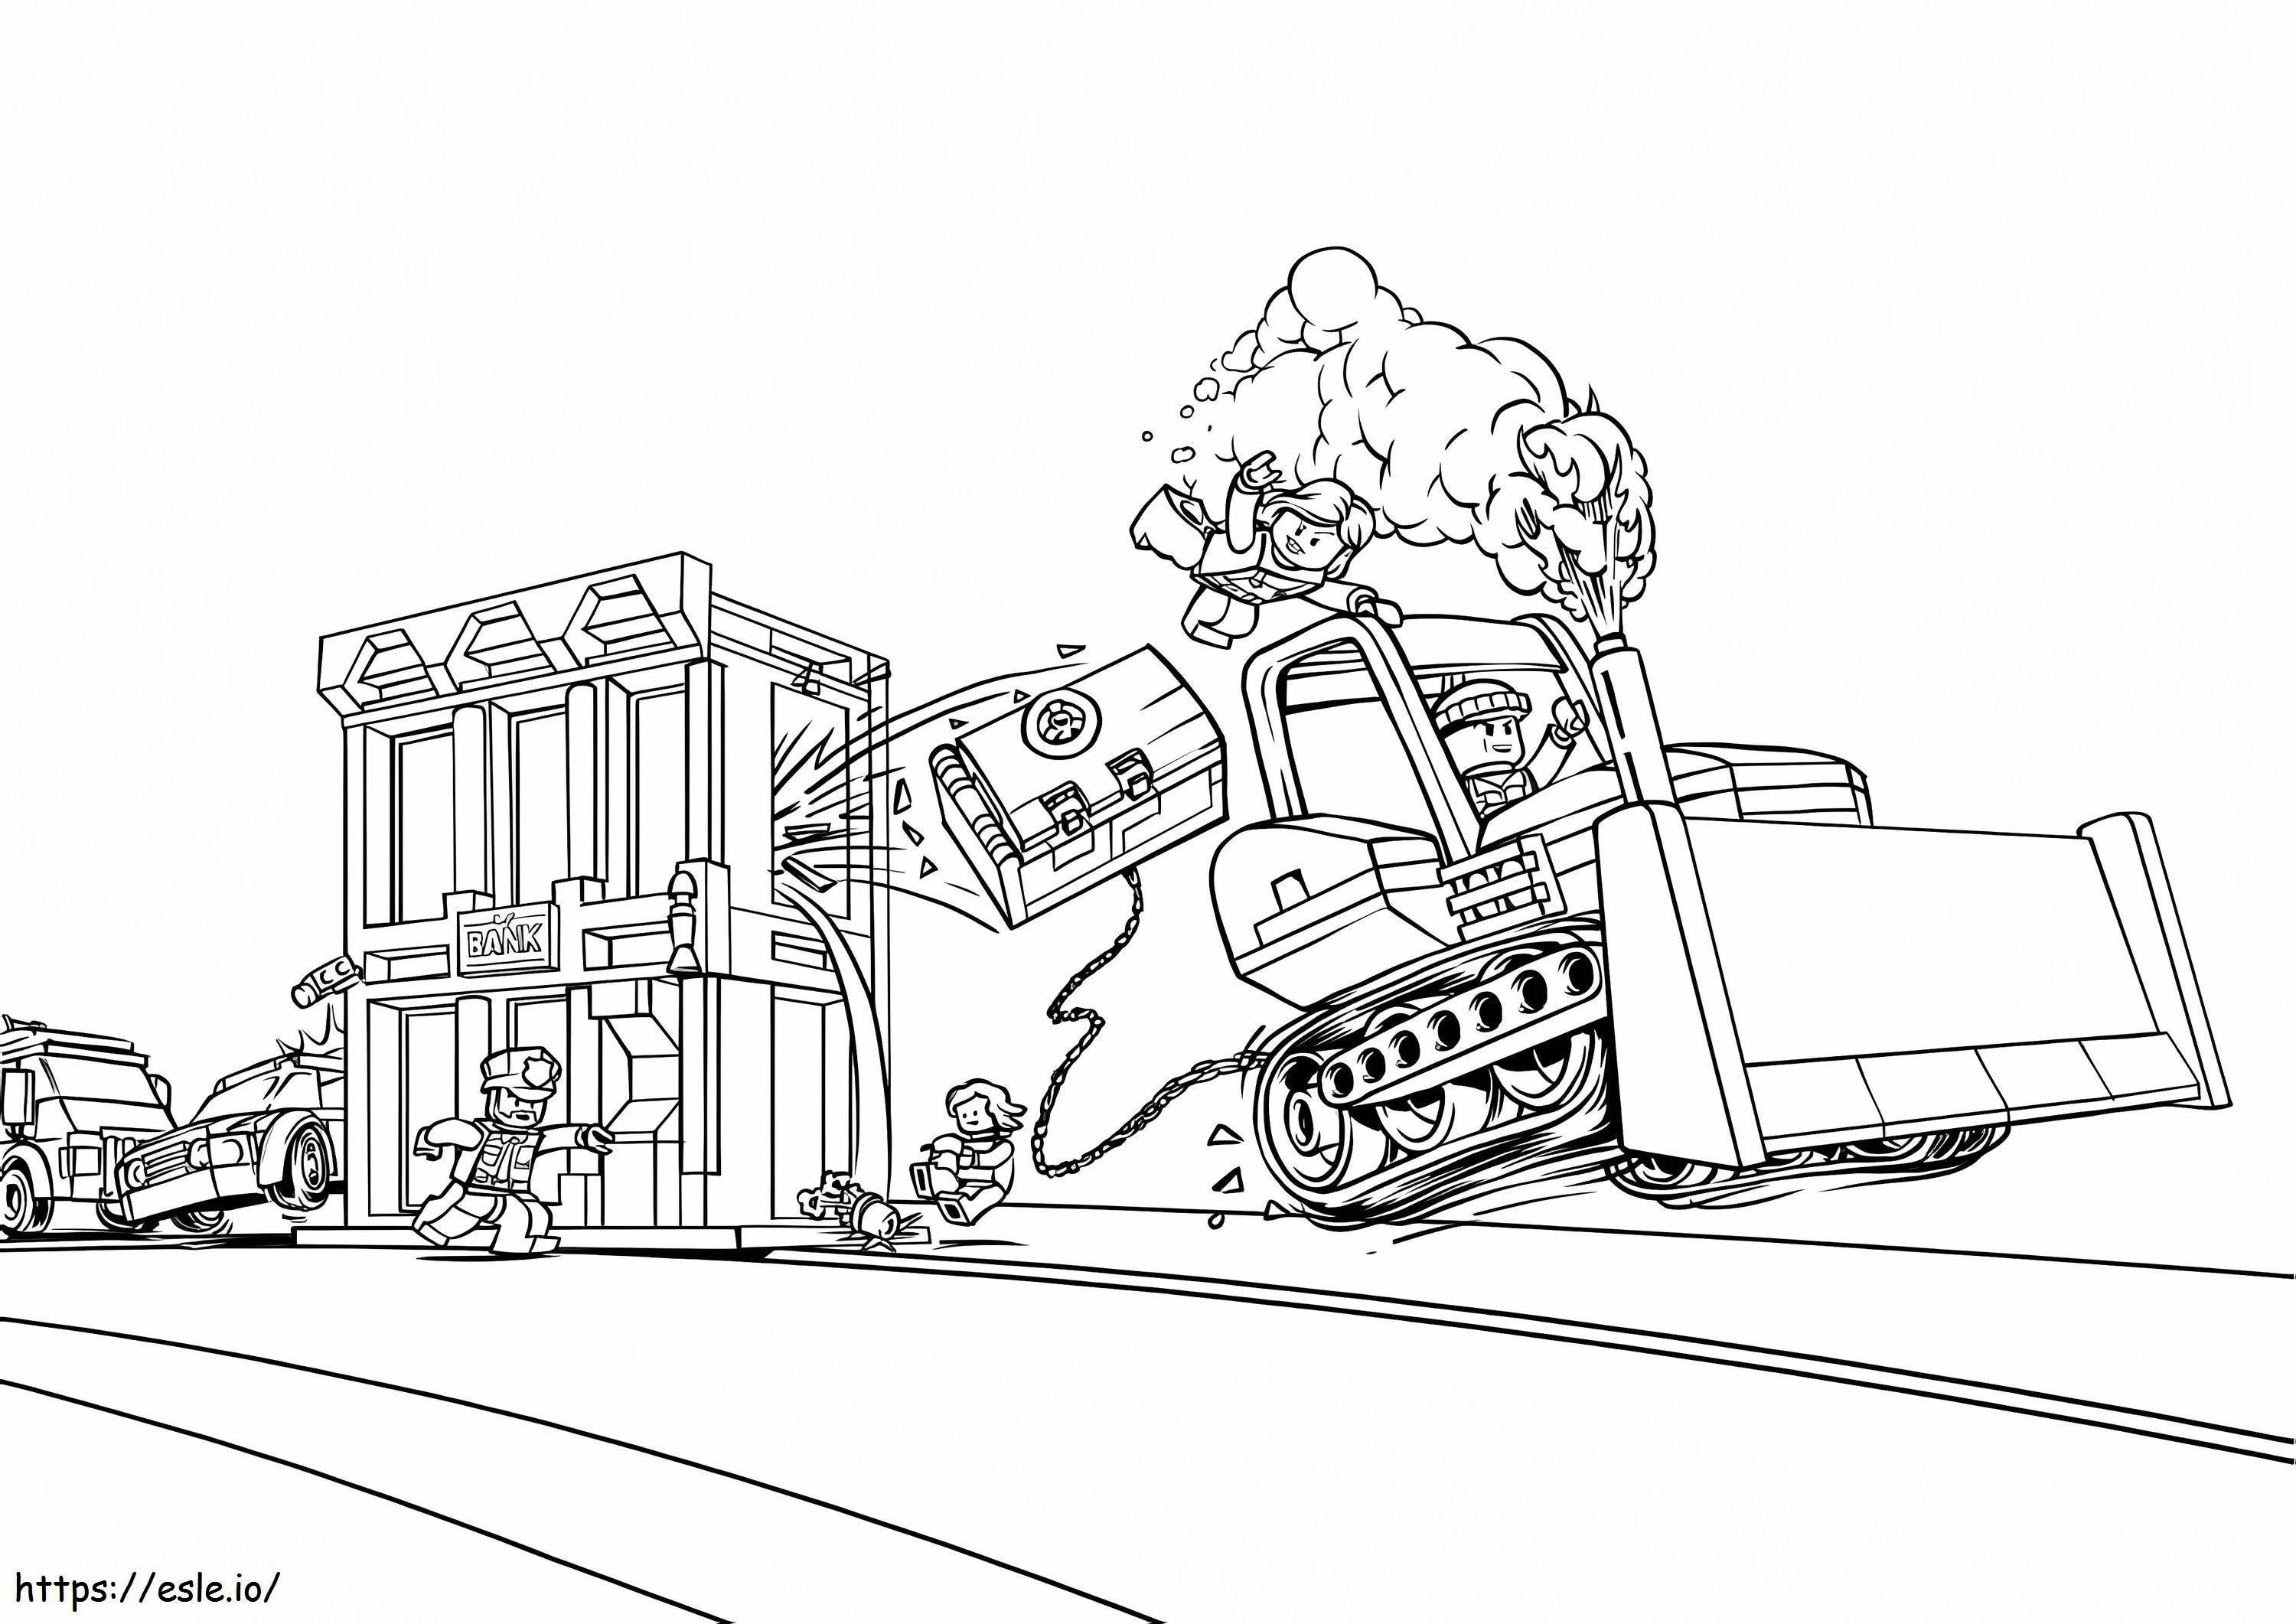 Lego City coloring page